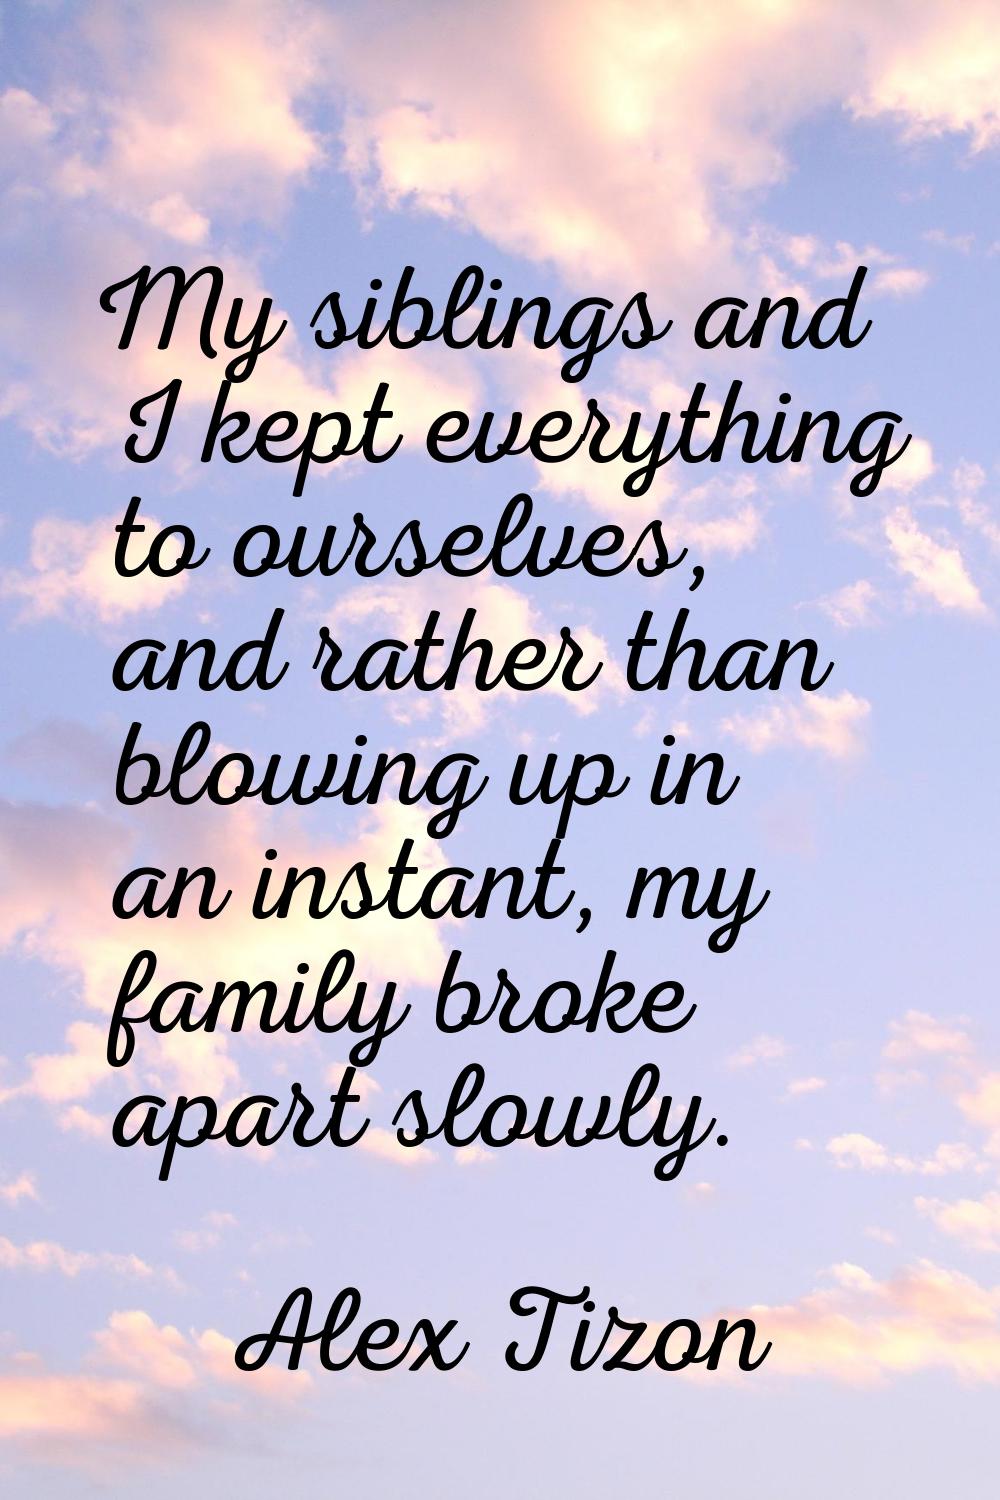 My siblings and I kept everything to ourselves, and rather than blowing up in an instant, my family